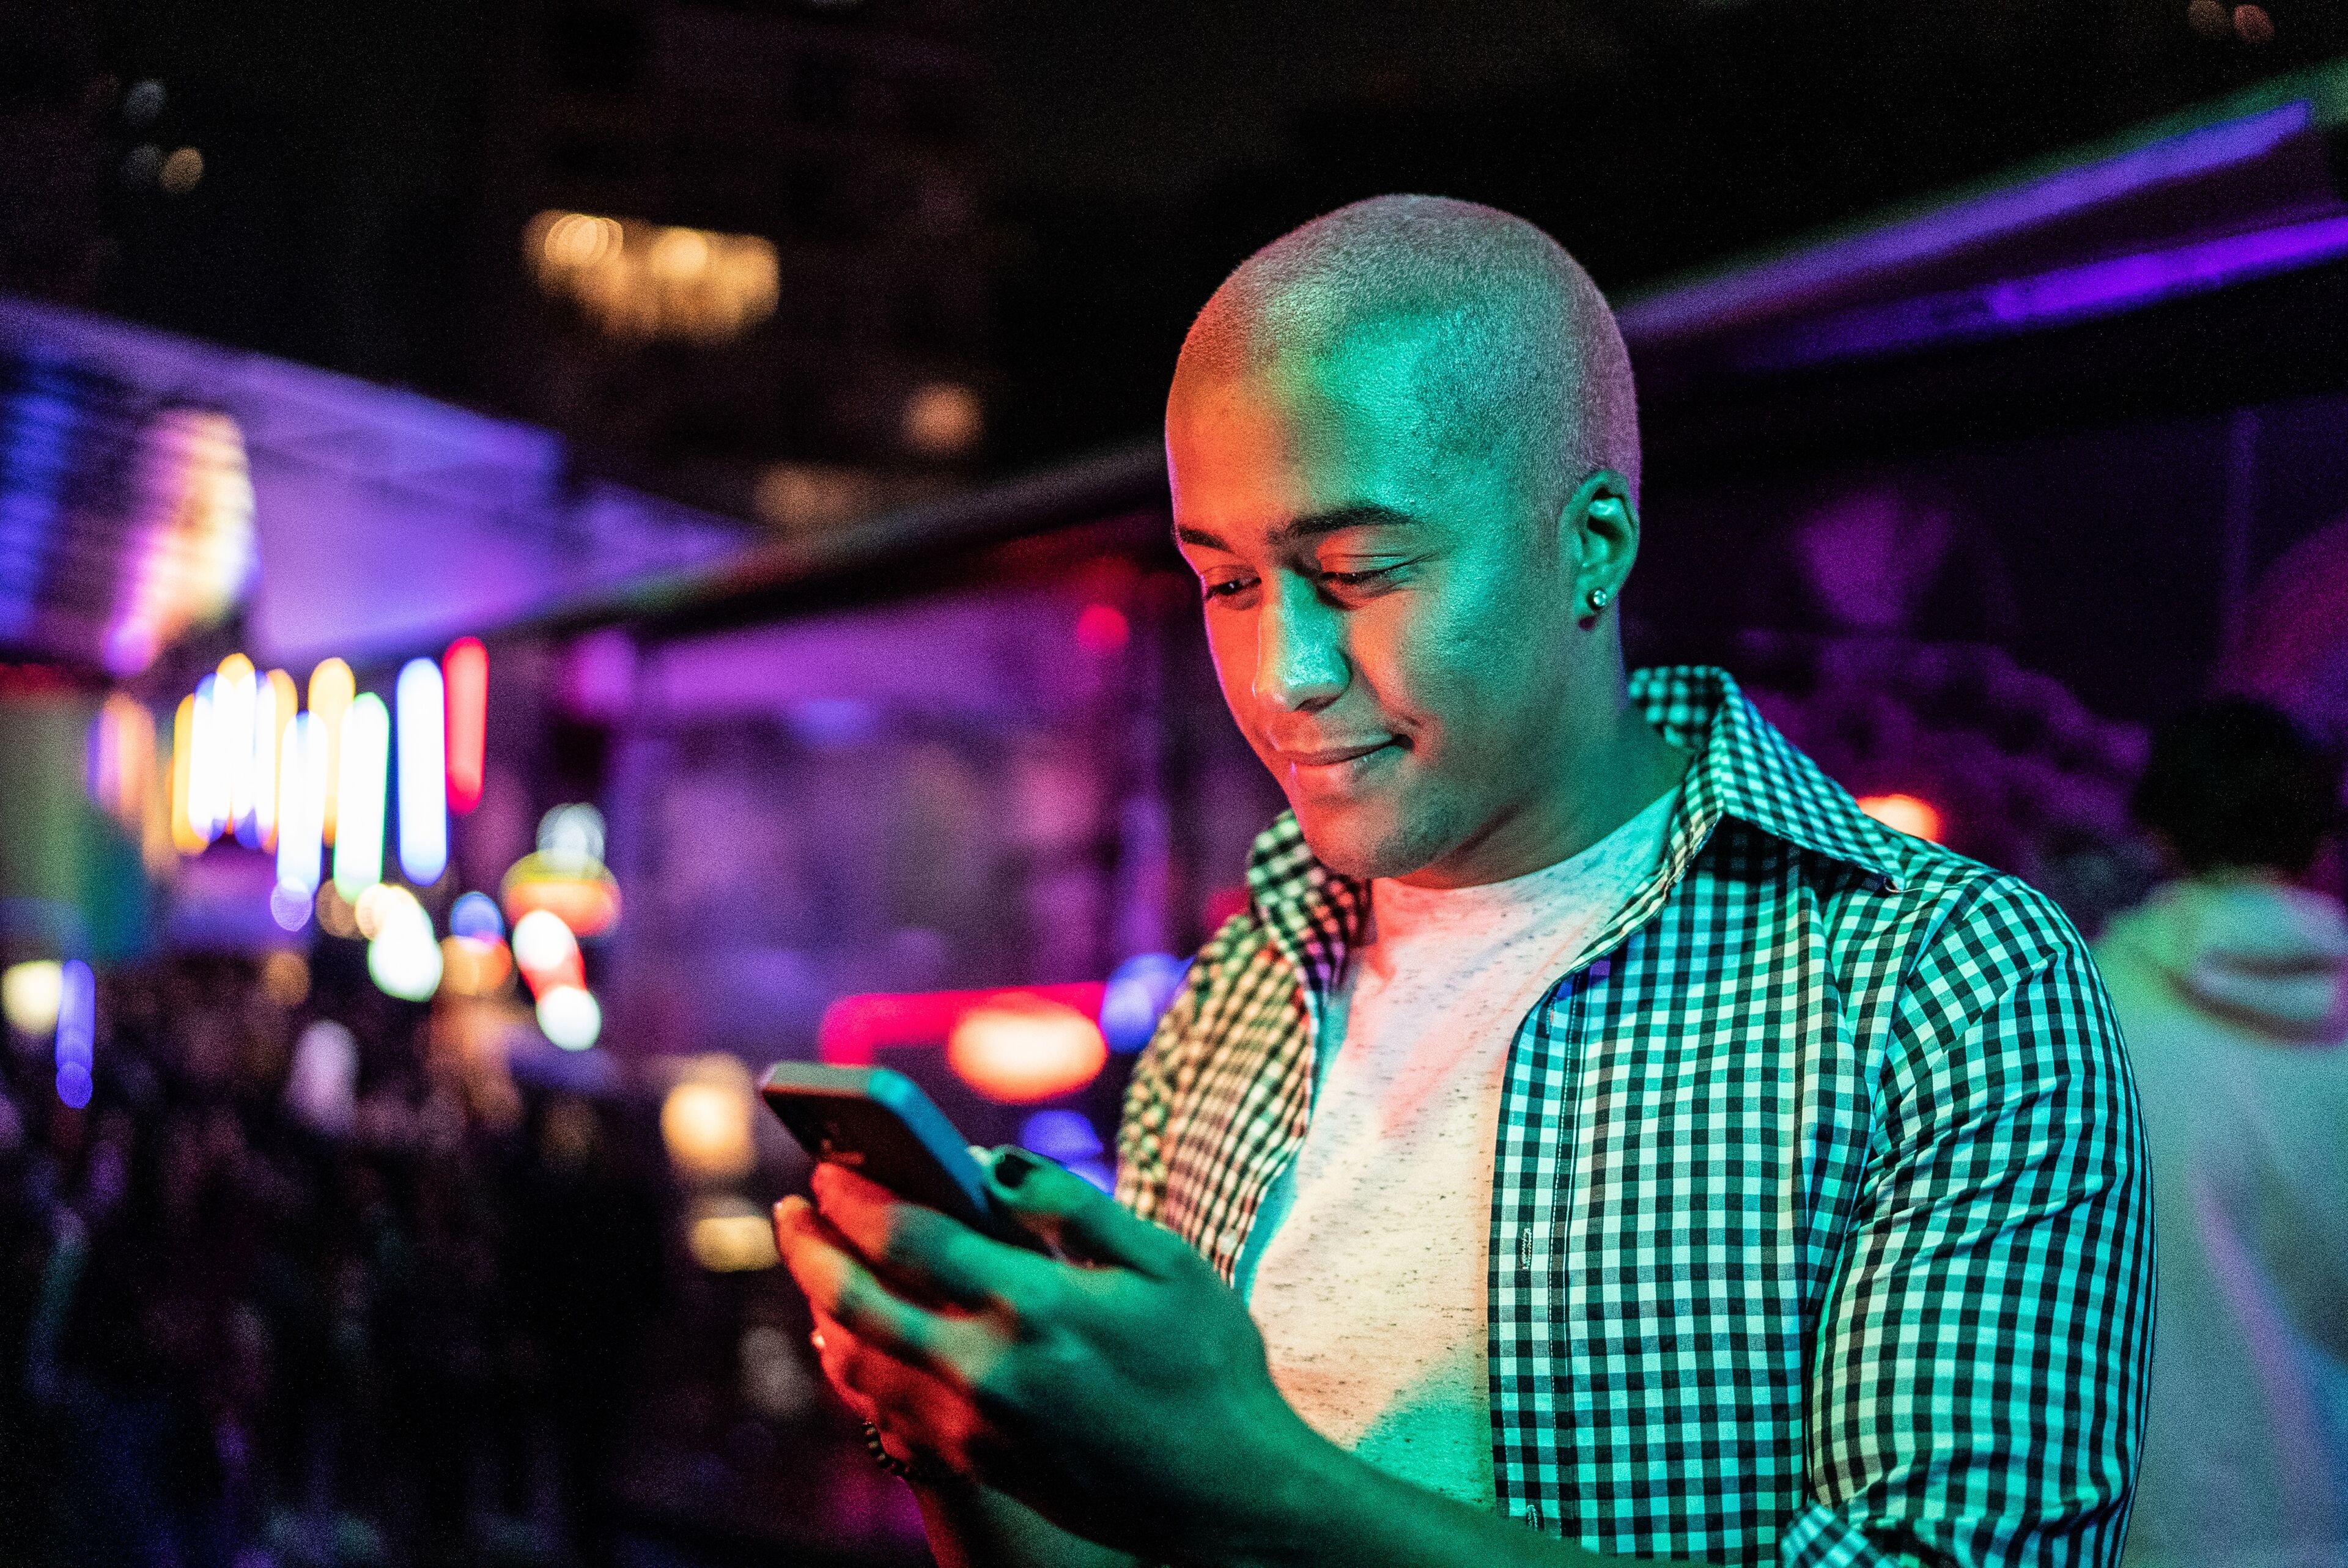 A bald man in a checkered shirt smiling at his phone amidst colorful neon lights.